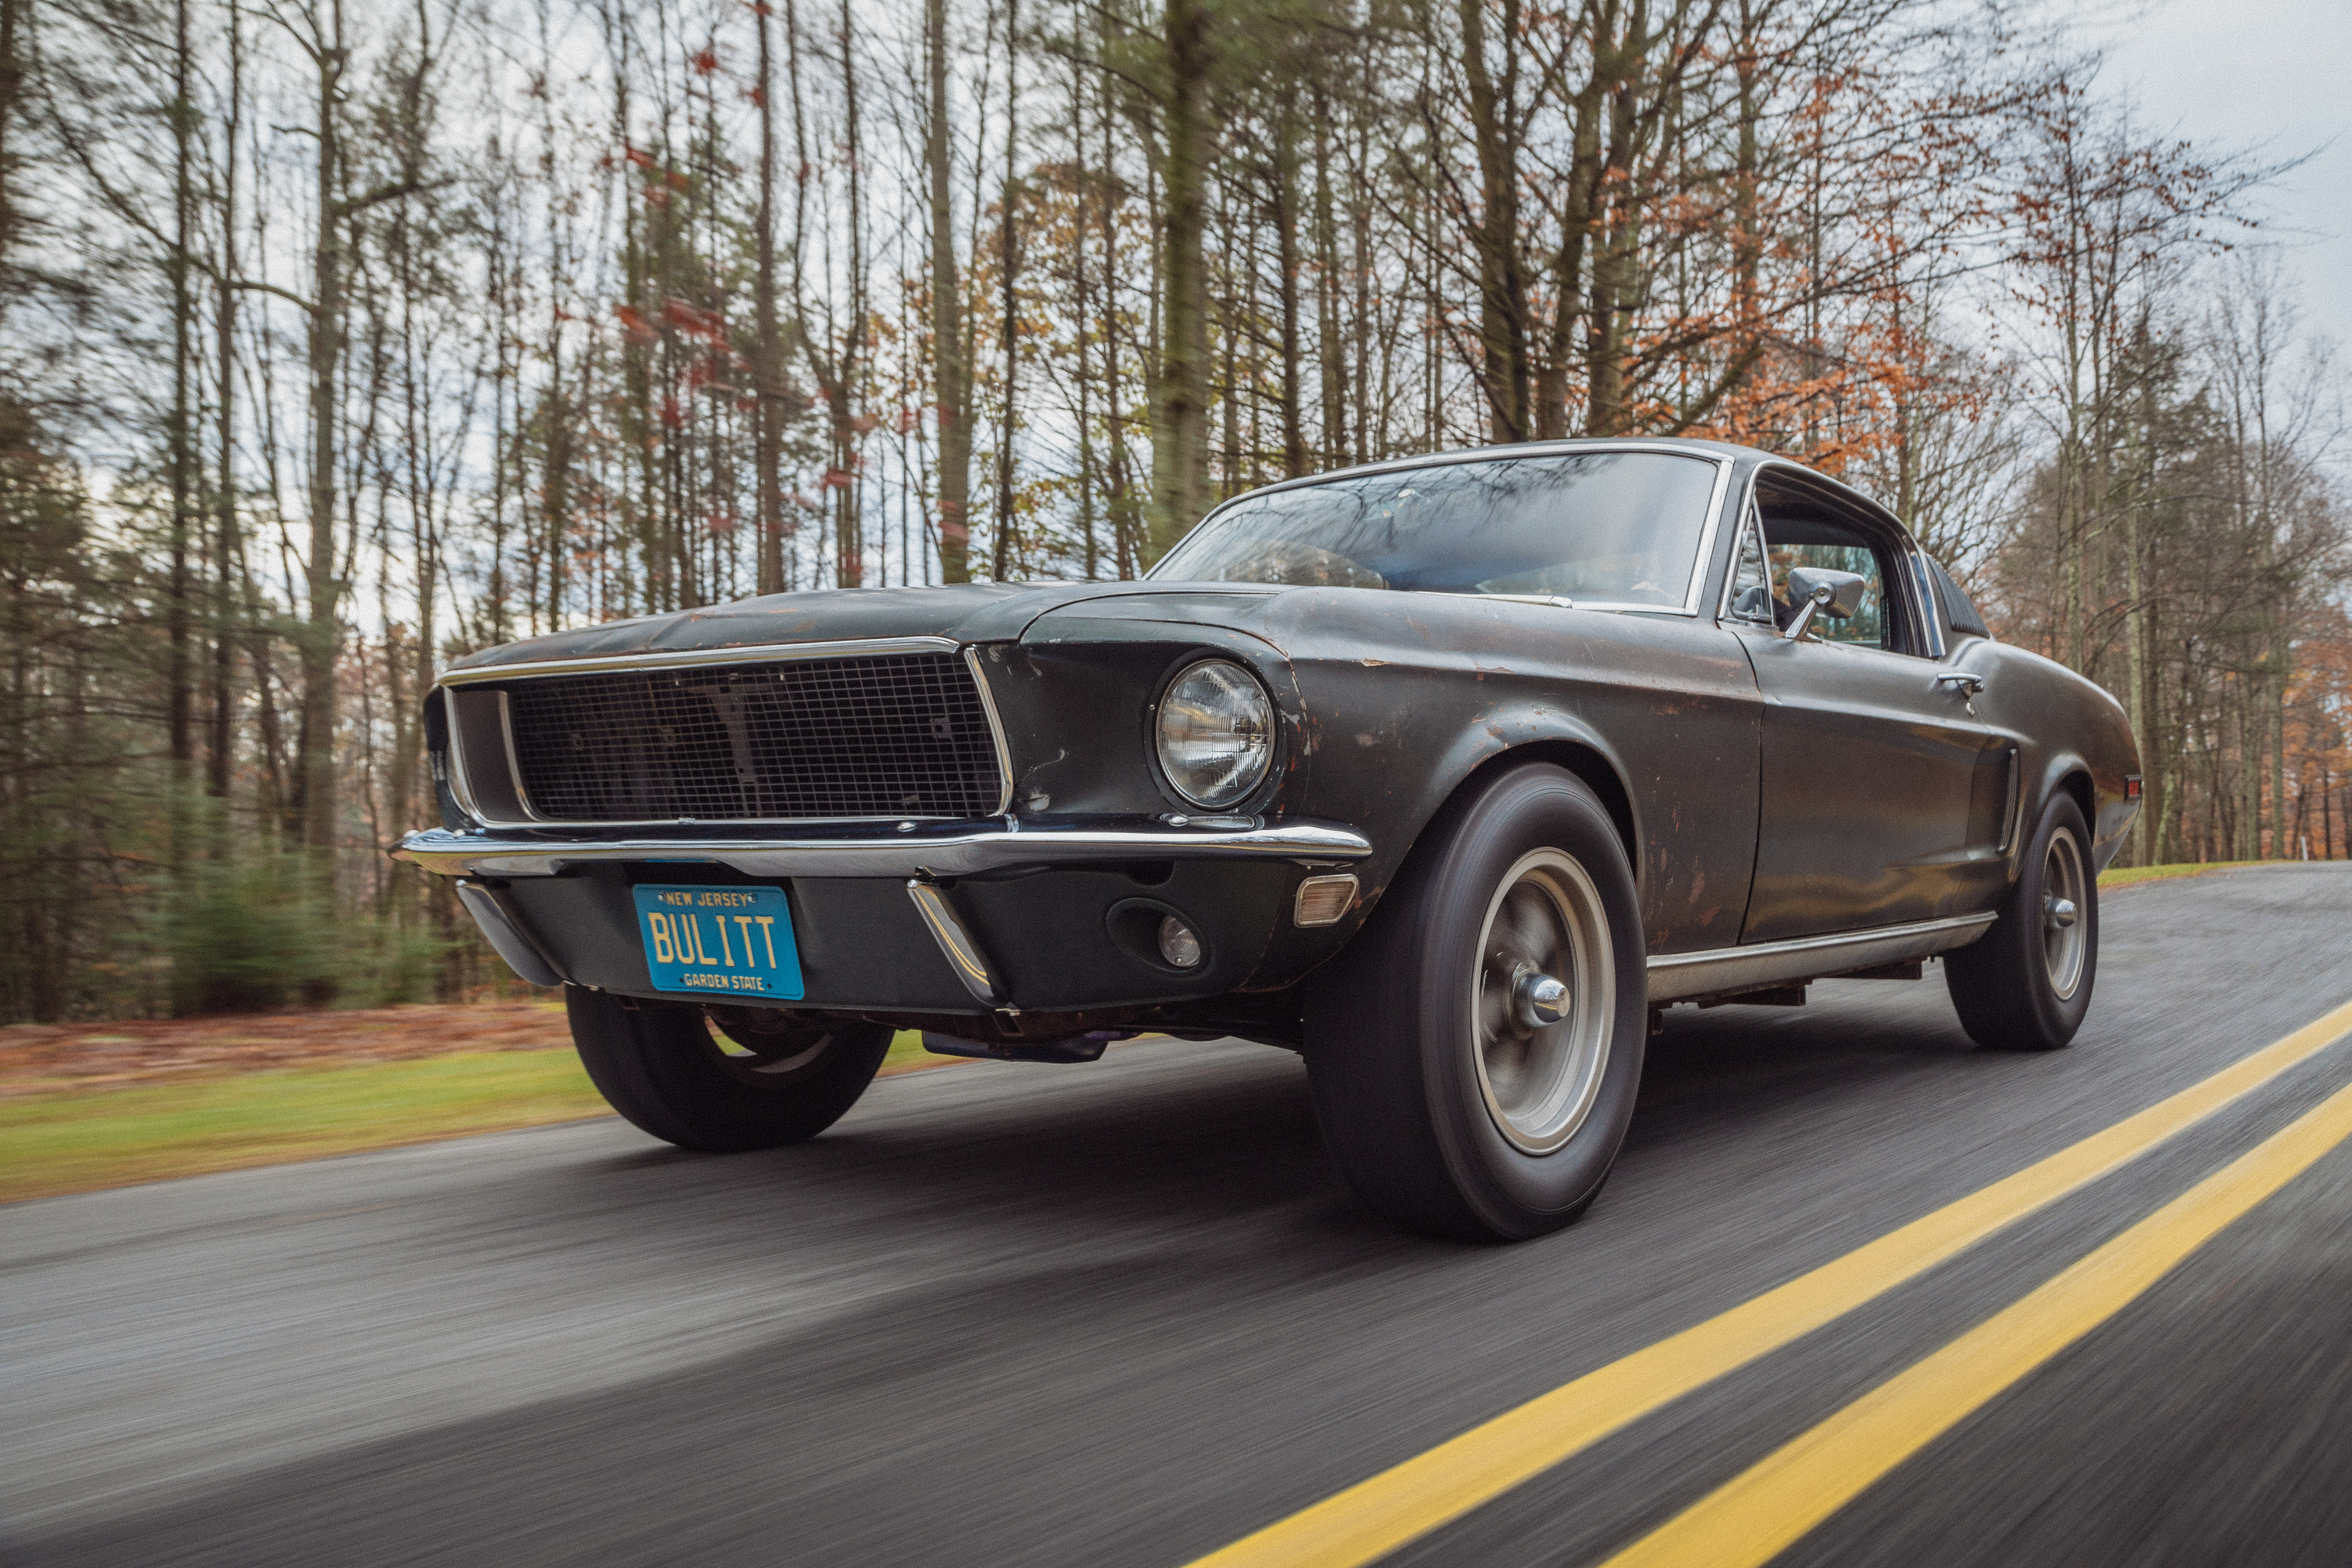 The Mustang is an iconic muscle car 